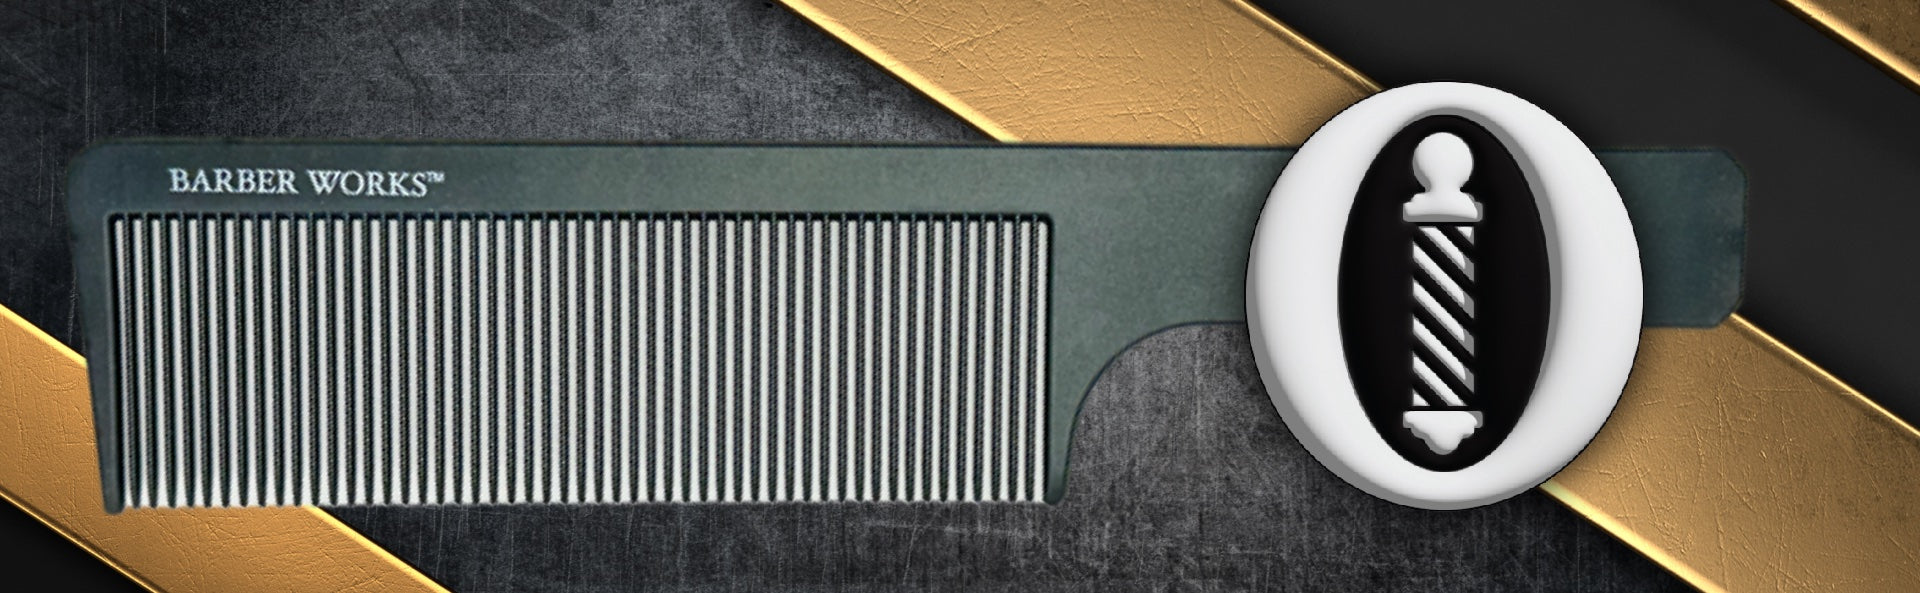 Barber Works 9-inch Fade Comb, showcasing professional quality and sleek design, perfect for creating smooth fades and blends in hairstyling.